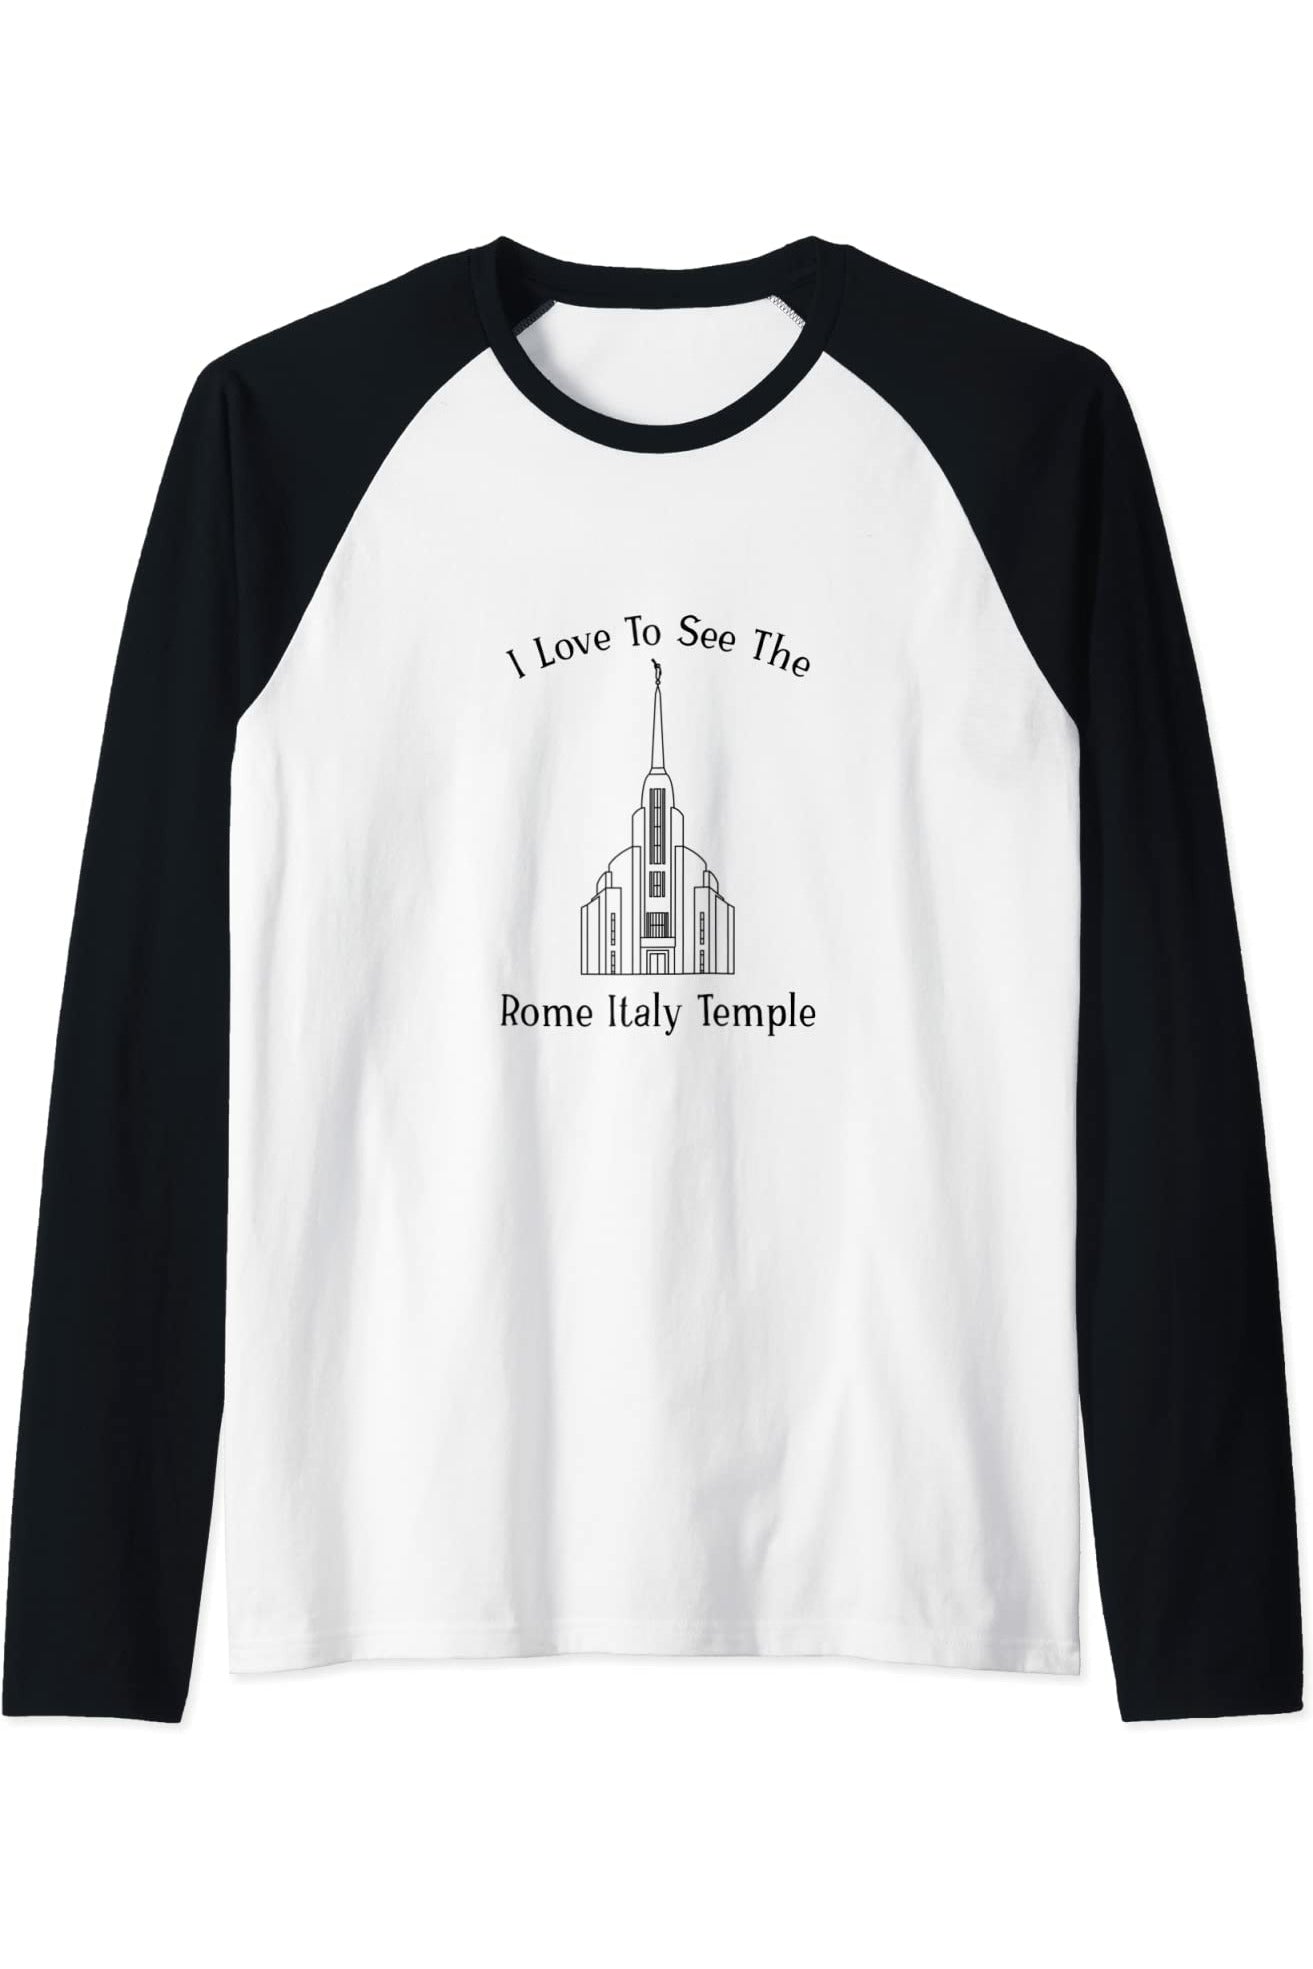 Rom Italy Temple, I love to see my Temple, happy Raglan T-Shirt